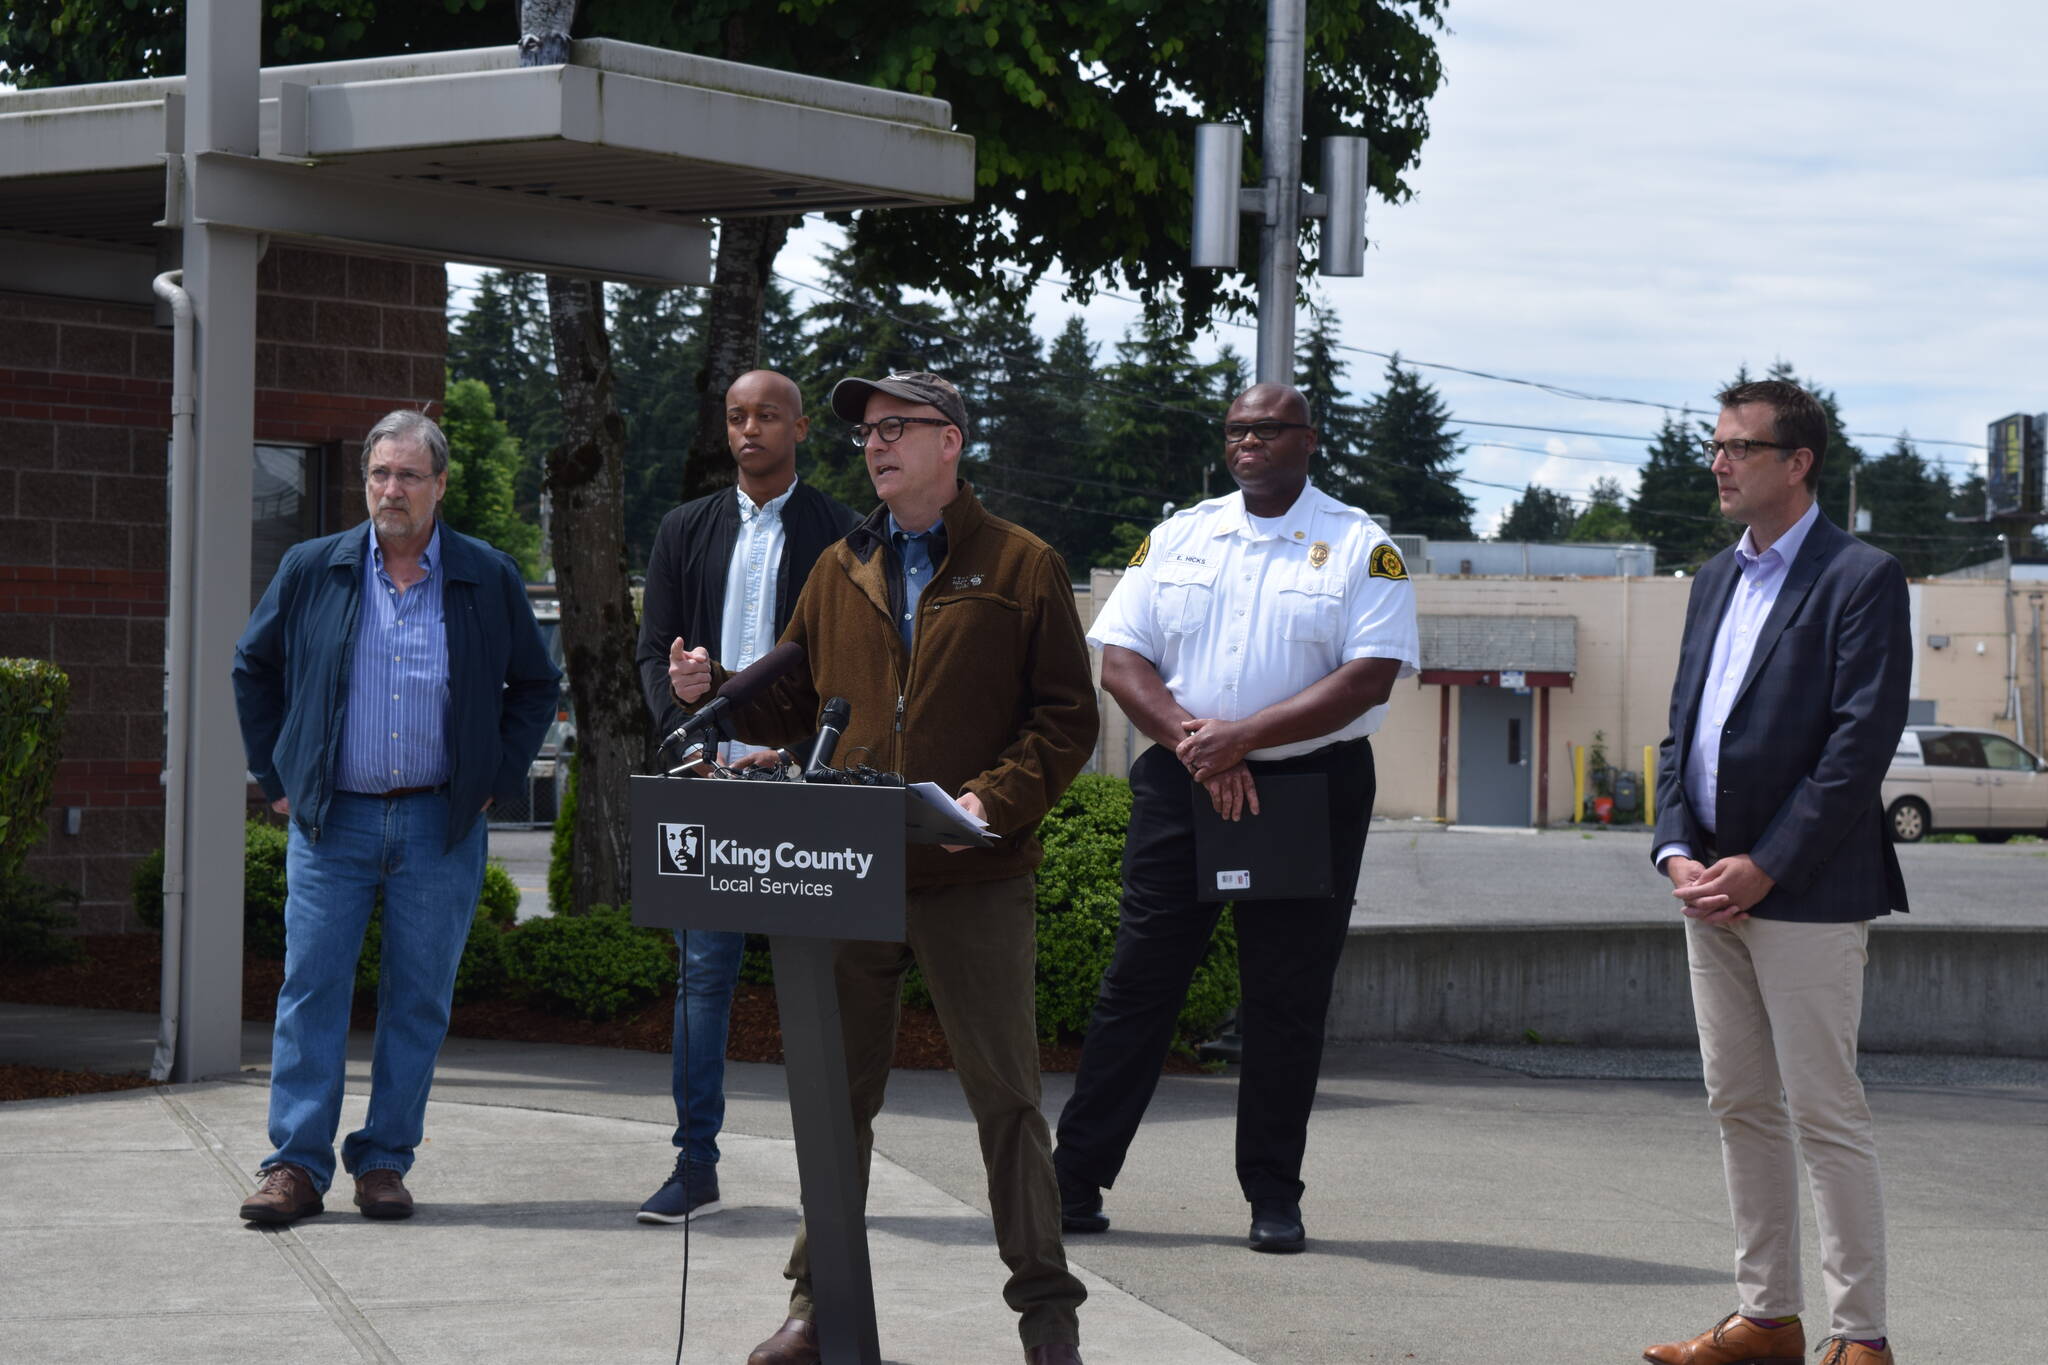 John Taylor, director of the King County Department of Local Services, speaks about the fireworks ban in Skyway on June 14. Behind Taylor (from left): King County Fire Marshal Chris Ricketts, King County Councilmember Girmay Zahilay, Skyway Fire Chief Eric Hicks and King County Councilmember Joe McDermott. Photo by Conor Wilson/Valley Record